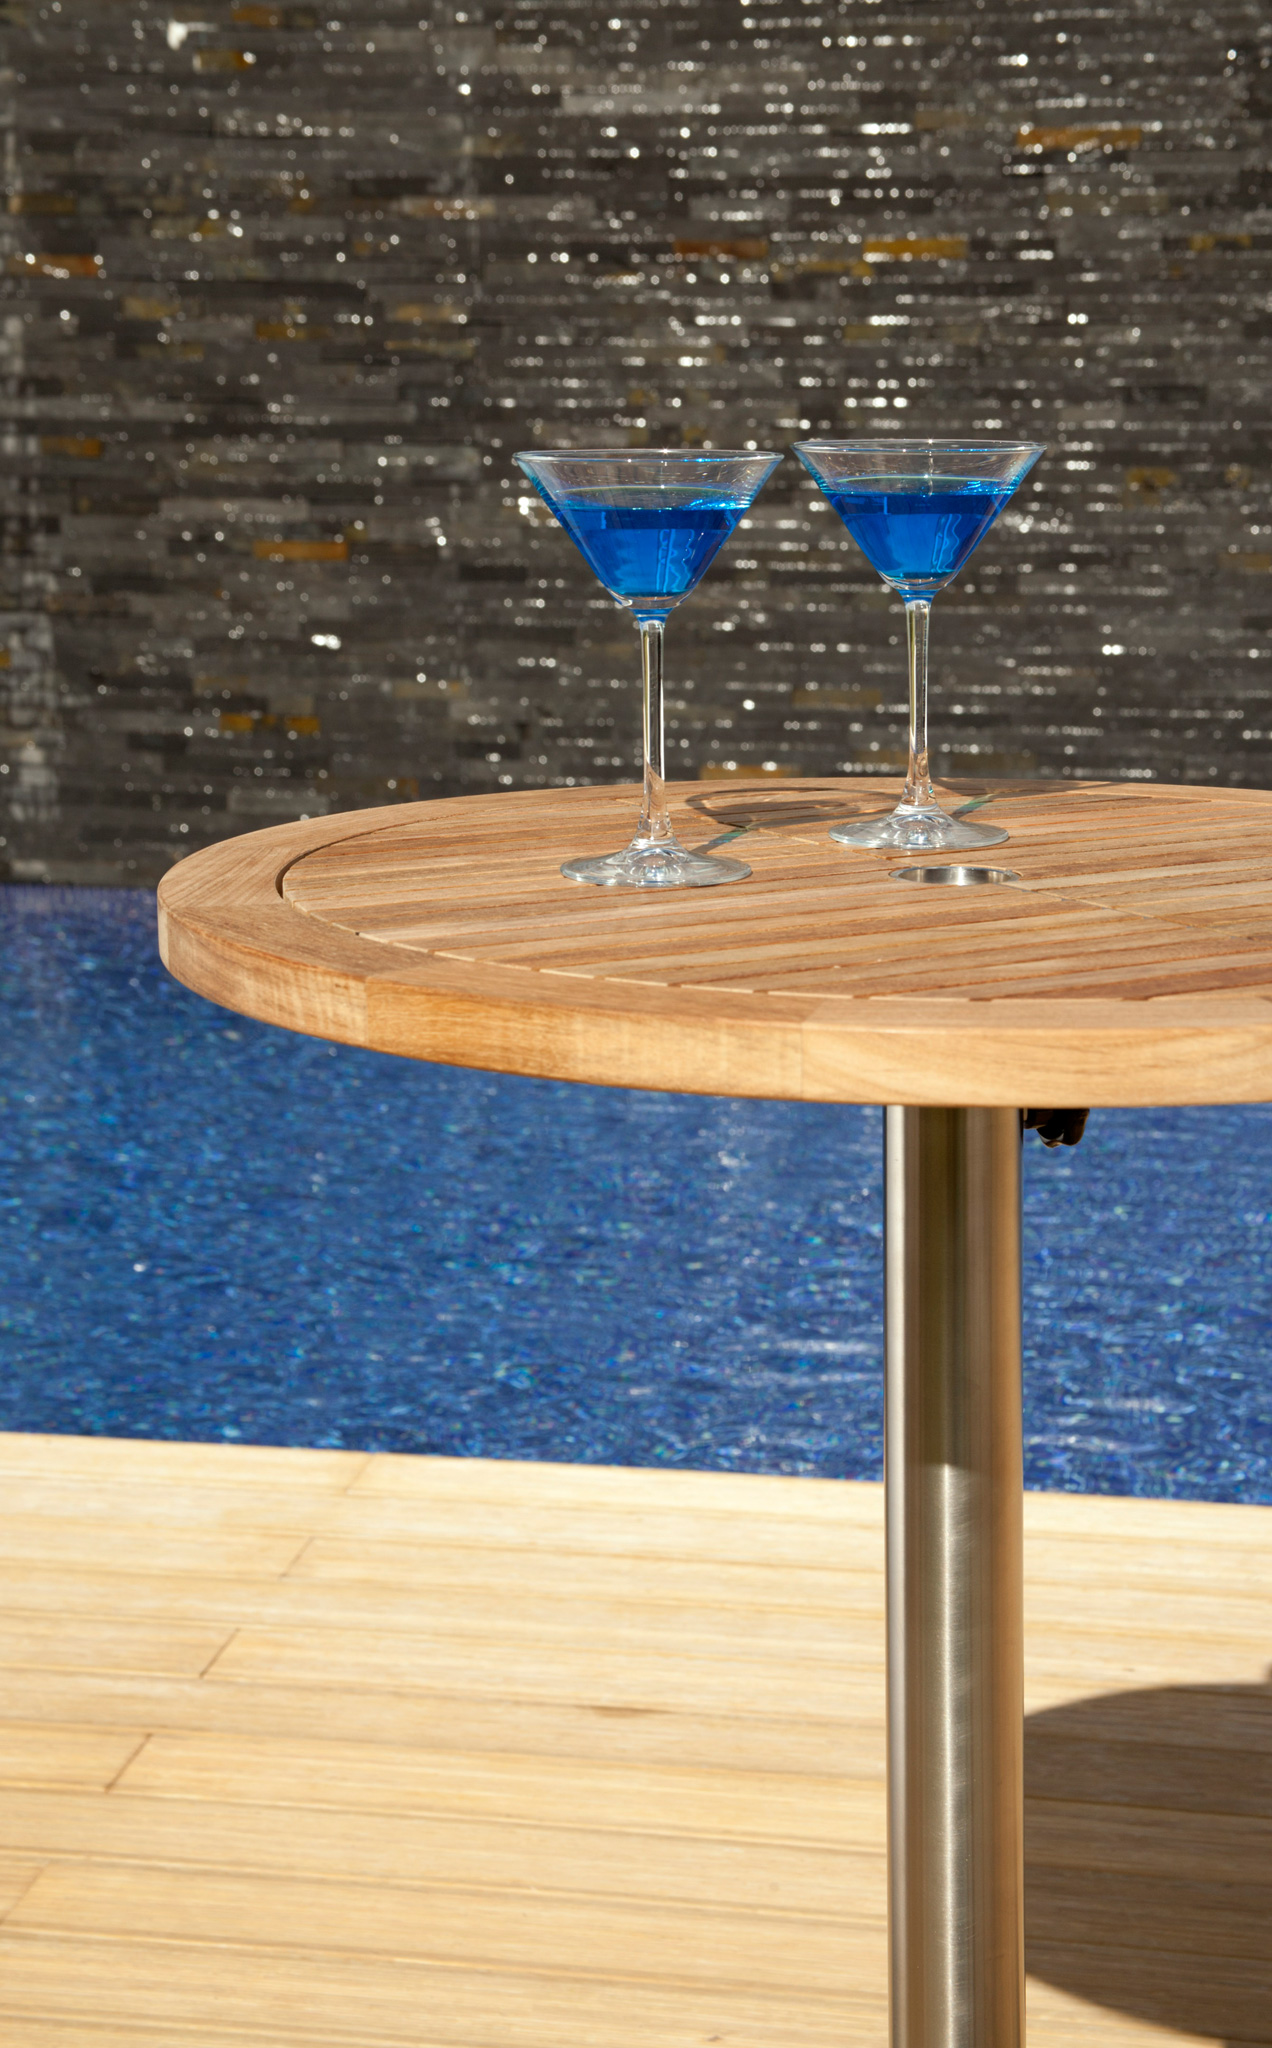 EQUINOX High Dining Bistro Table